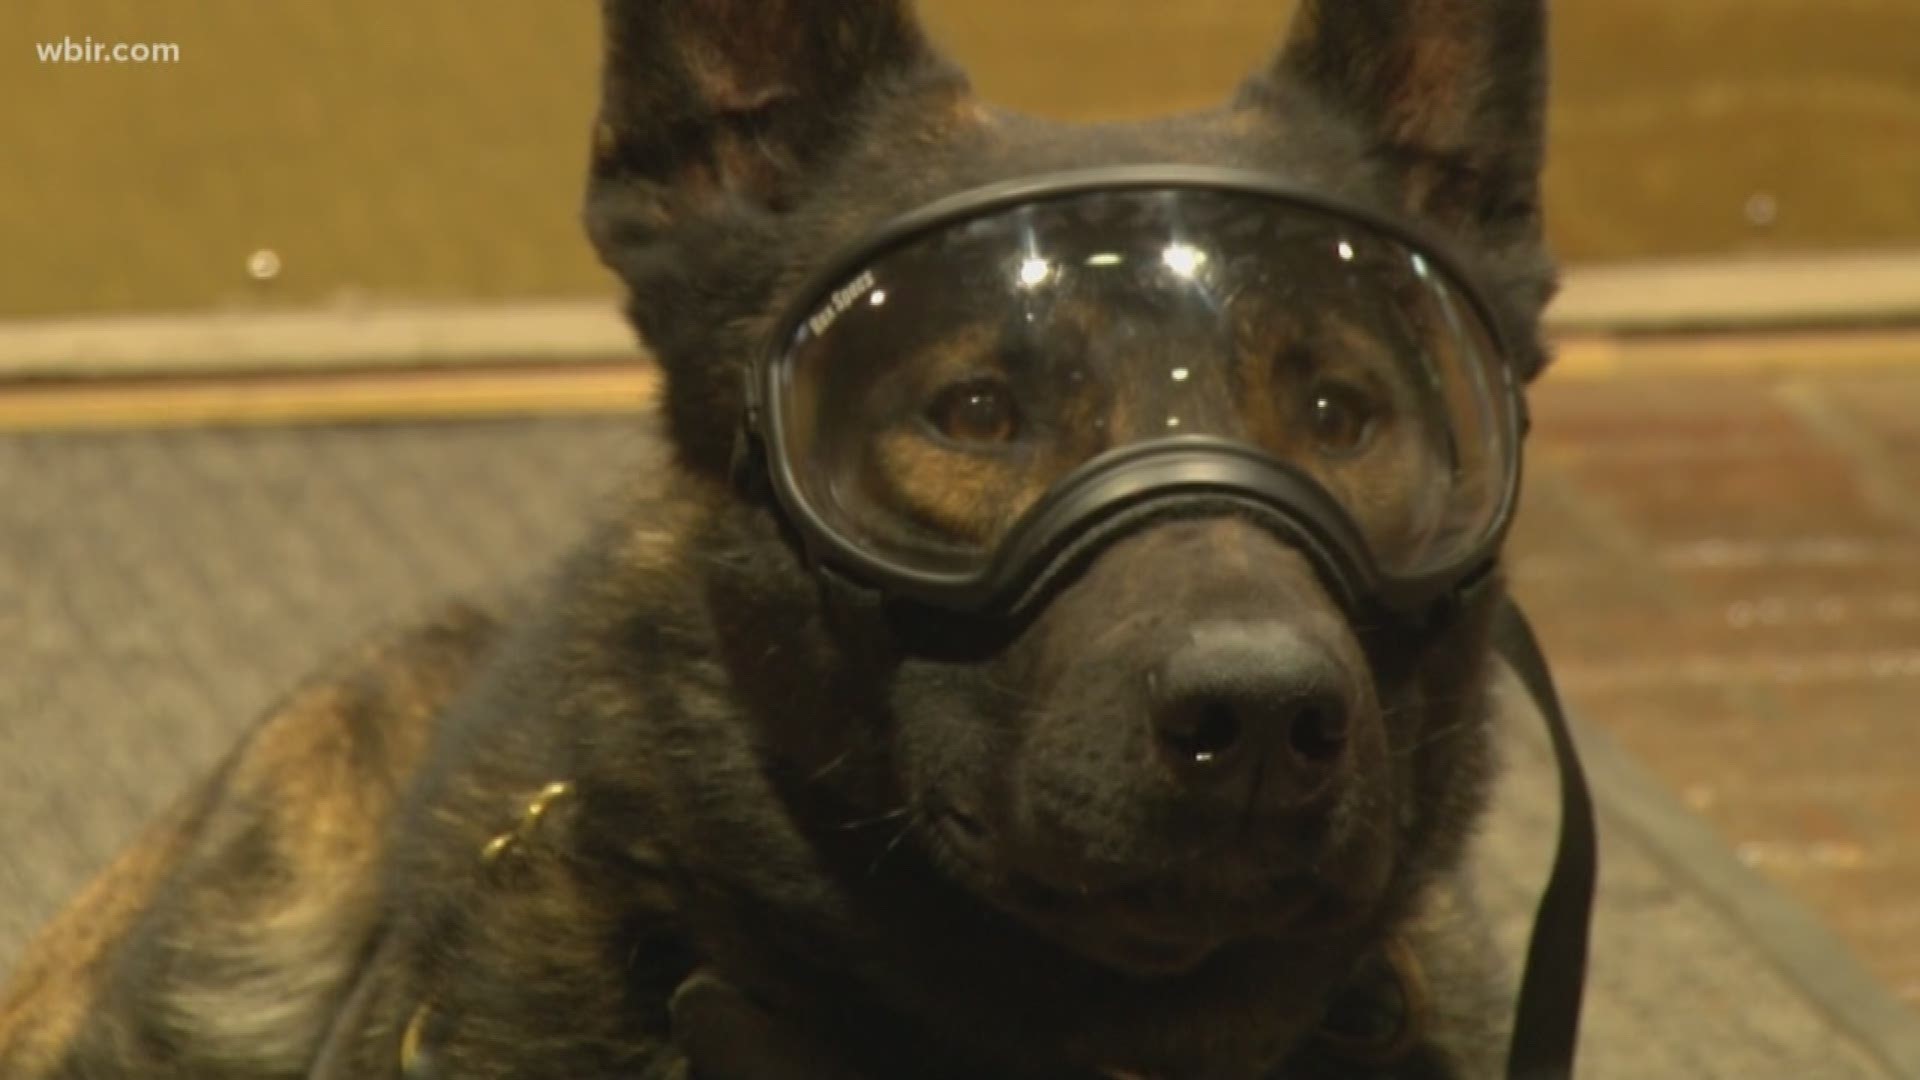 The goggles are designed to help protect the K-9's eyes, especially during training and hazardous working conditions.